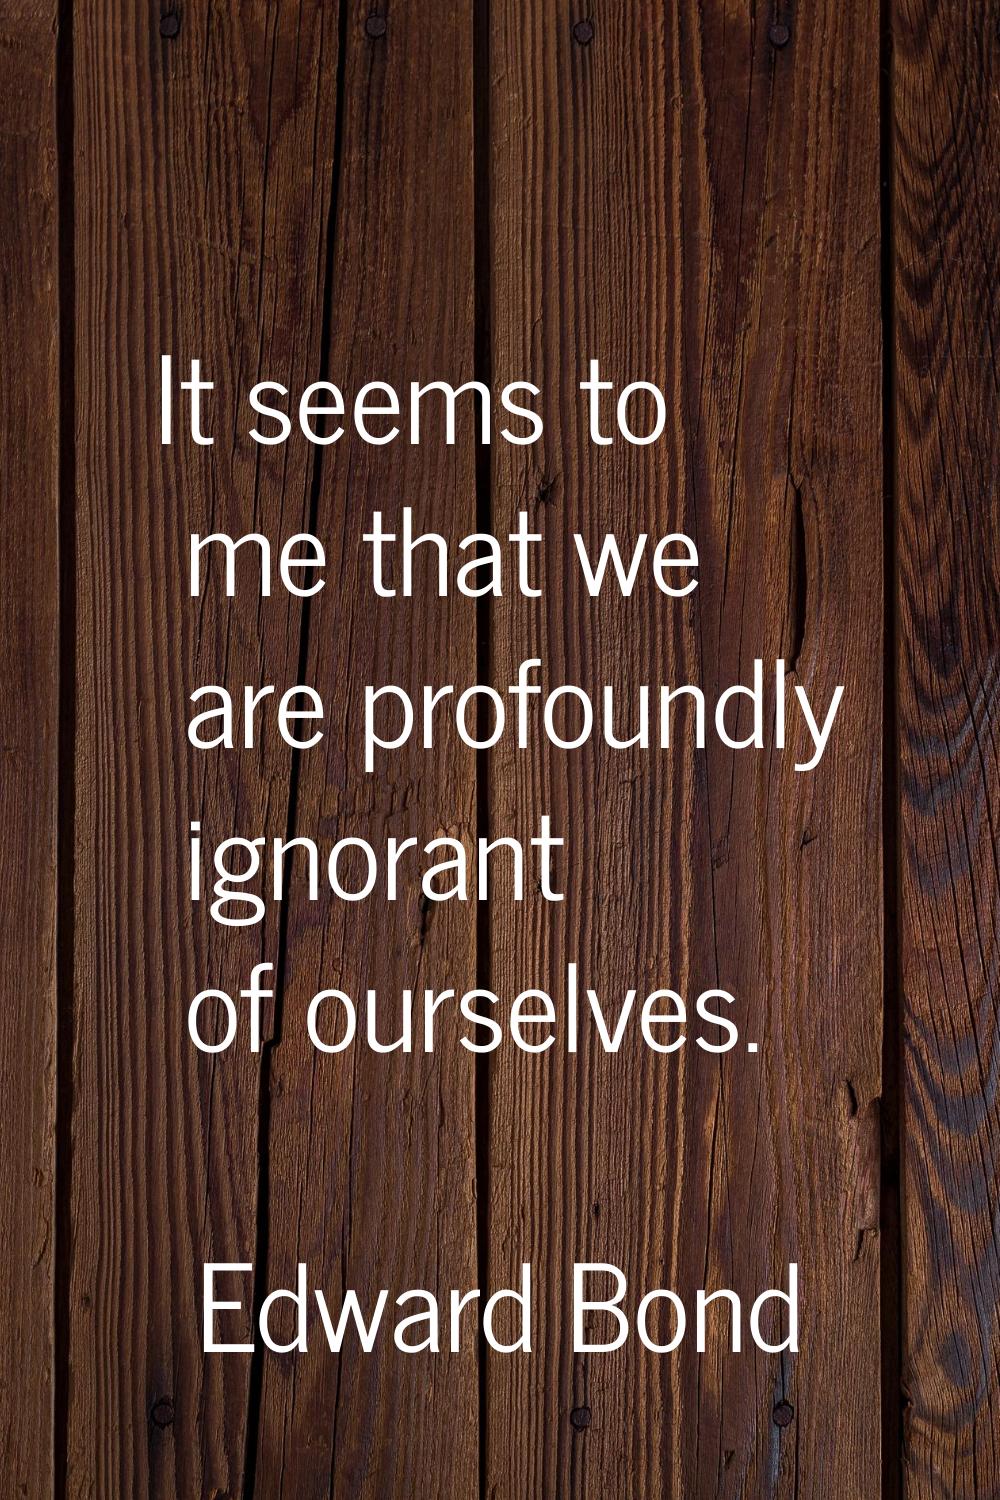 It seems to me that we are profoundly ignorant of ourselves.